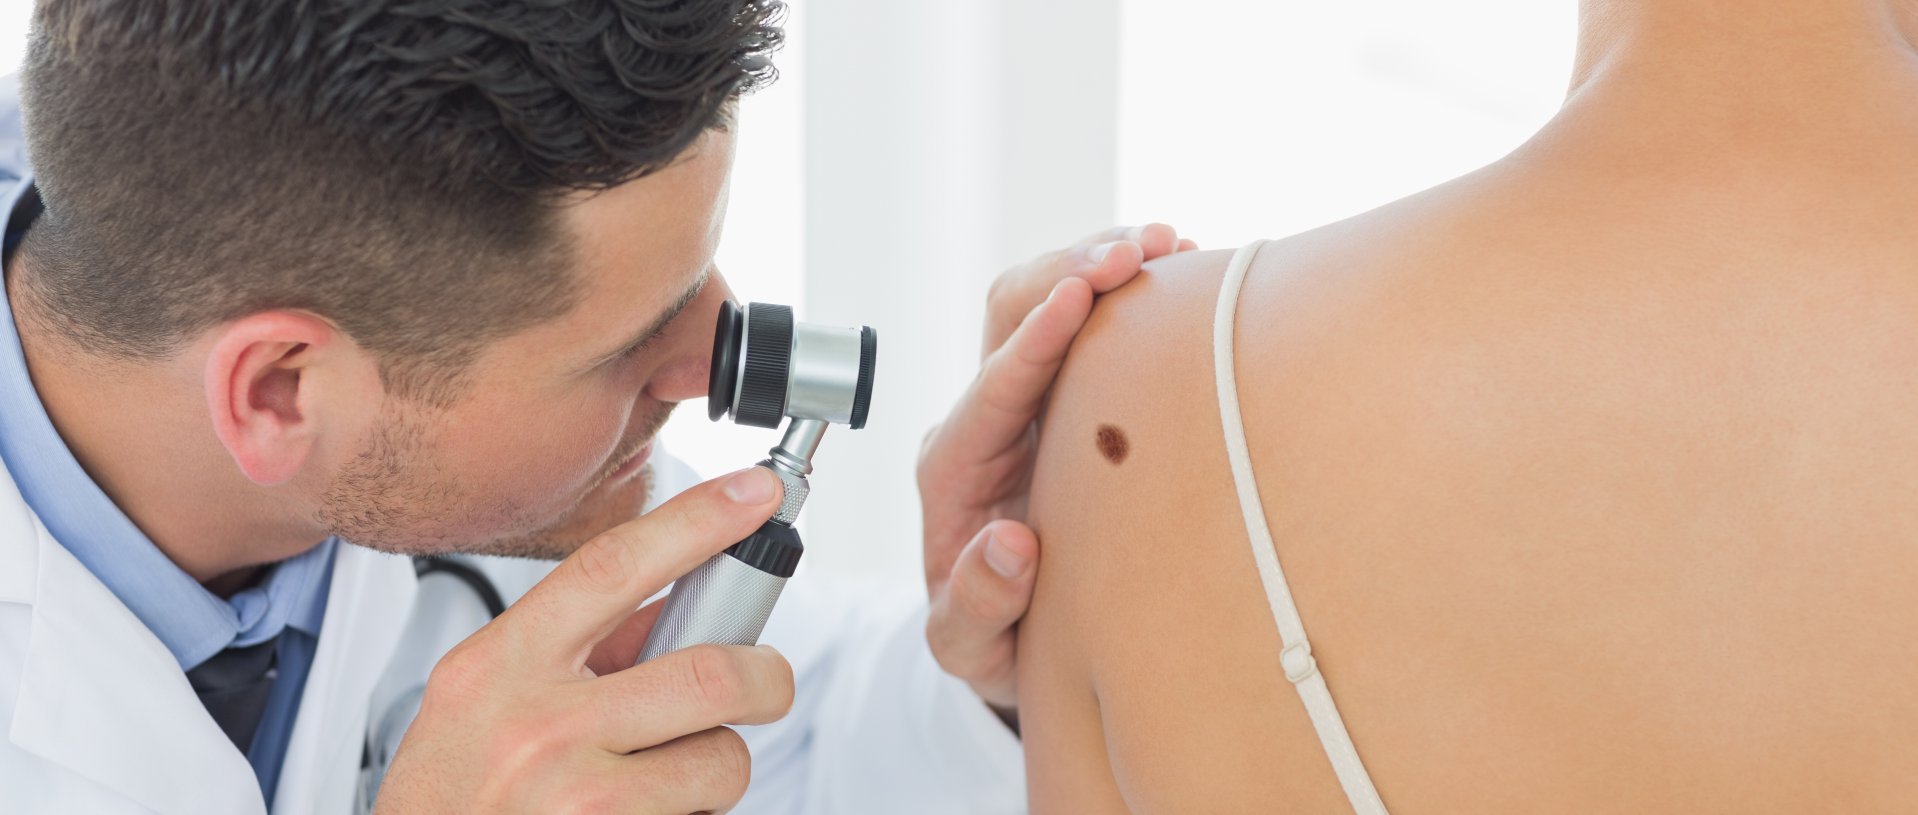 male doctor examining mole on back of woman